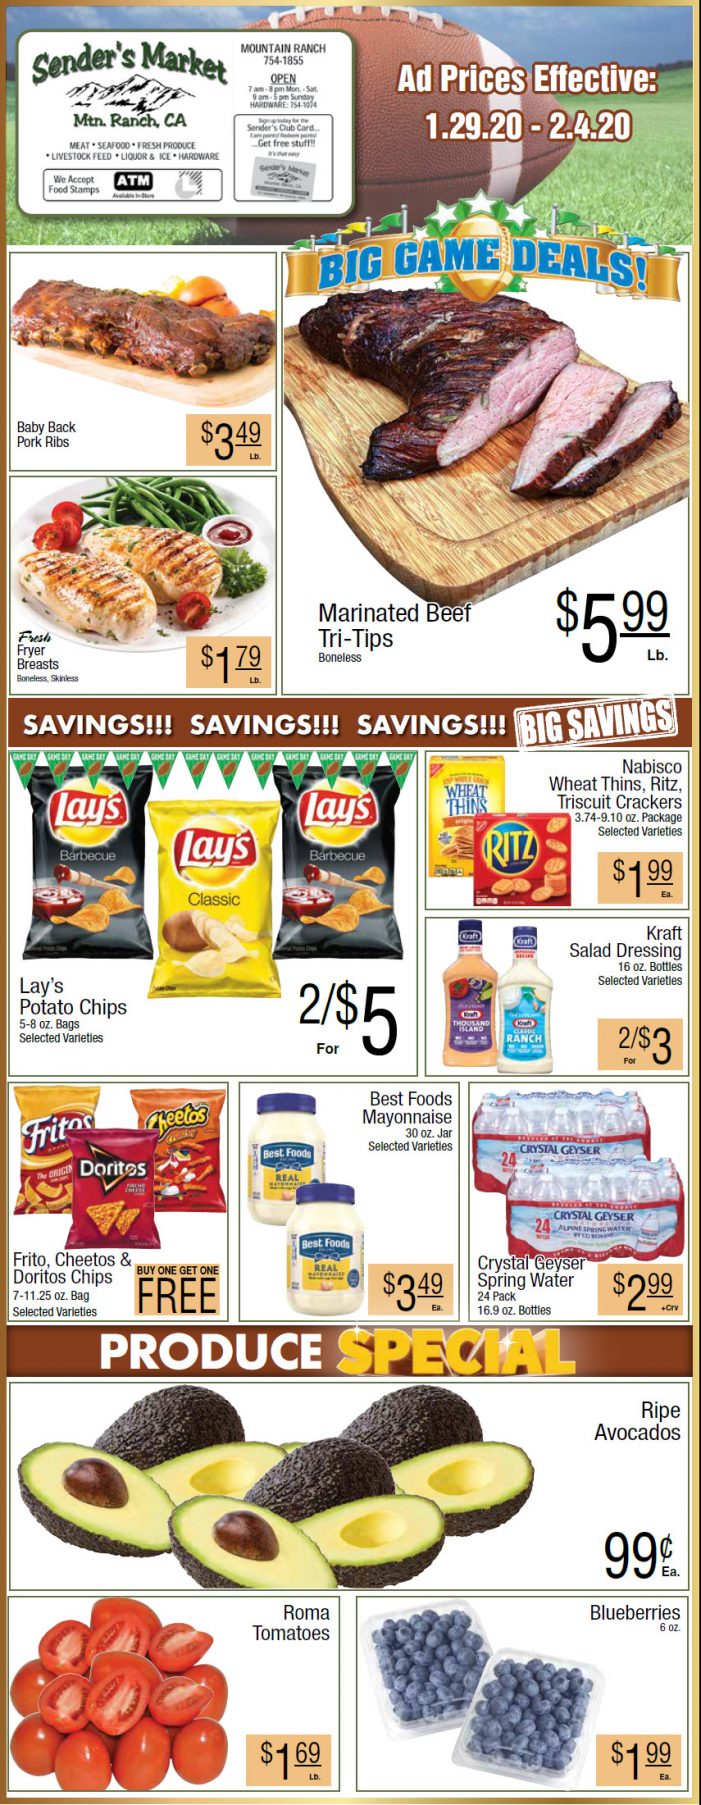 Sender’s Market’s Grocery Ad & Grocery Specials Through February 4th